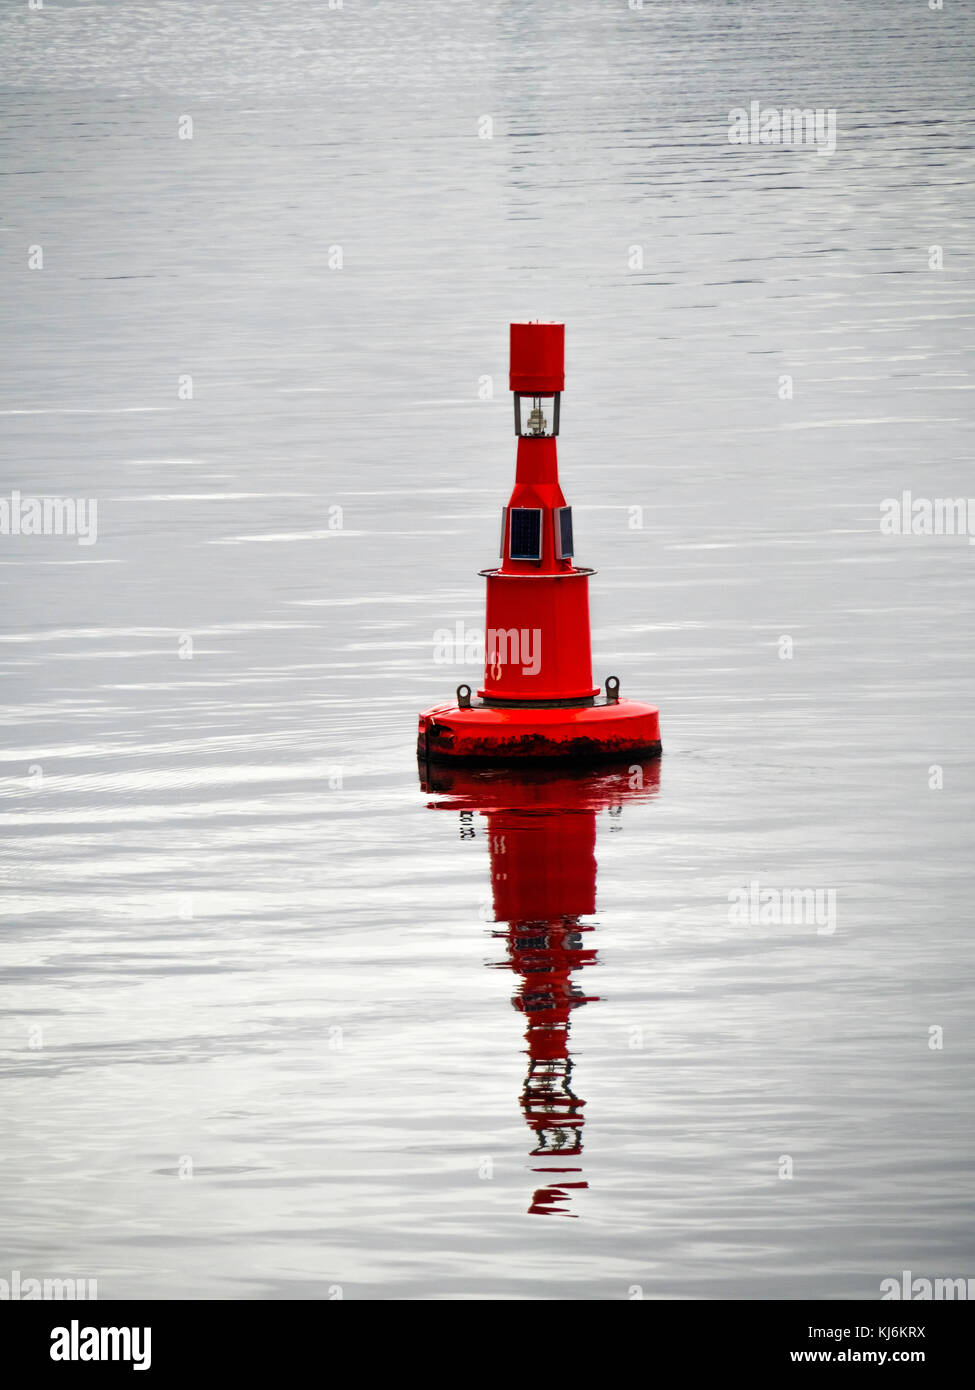 A red channel marker buoy in the Port of Tees with solar powered lighting.  Ships must leave this buoy to their port side when entering the harbour  Stock Photo - Alamy